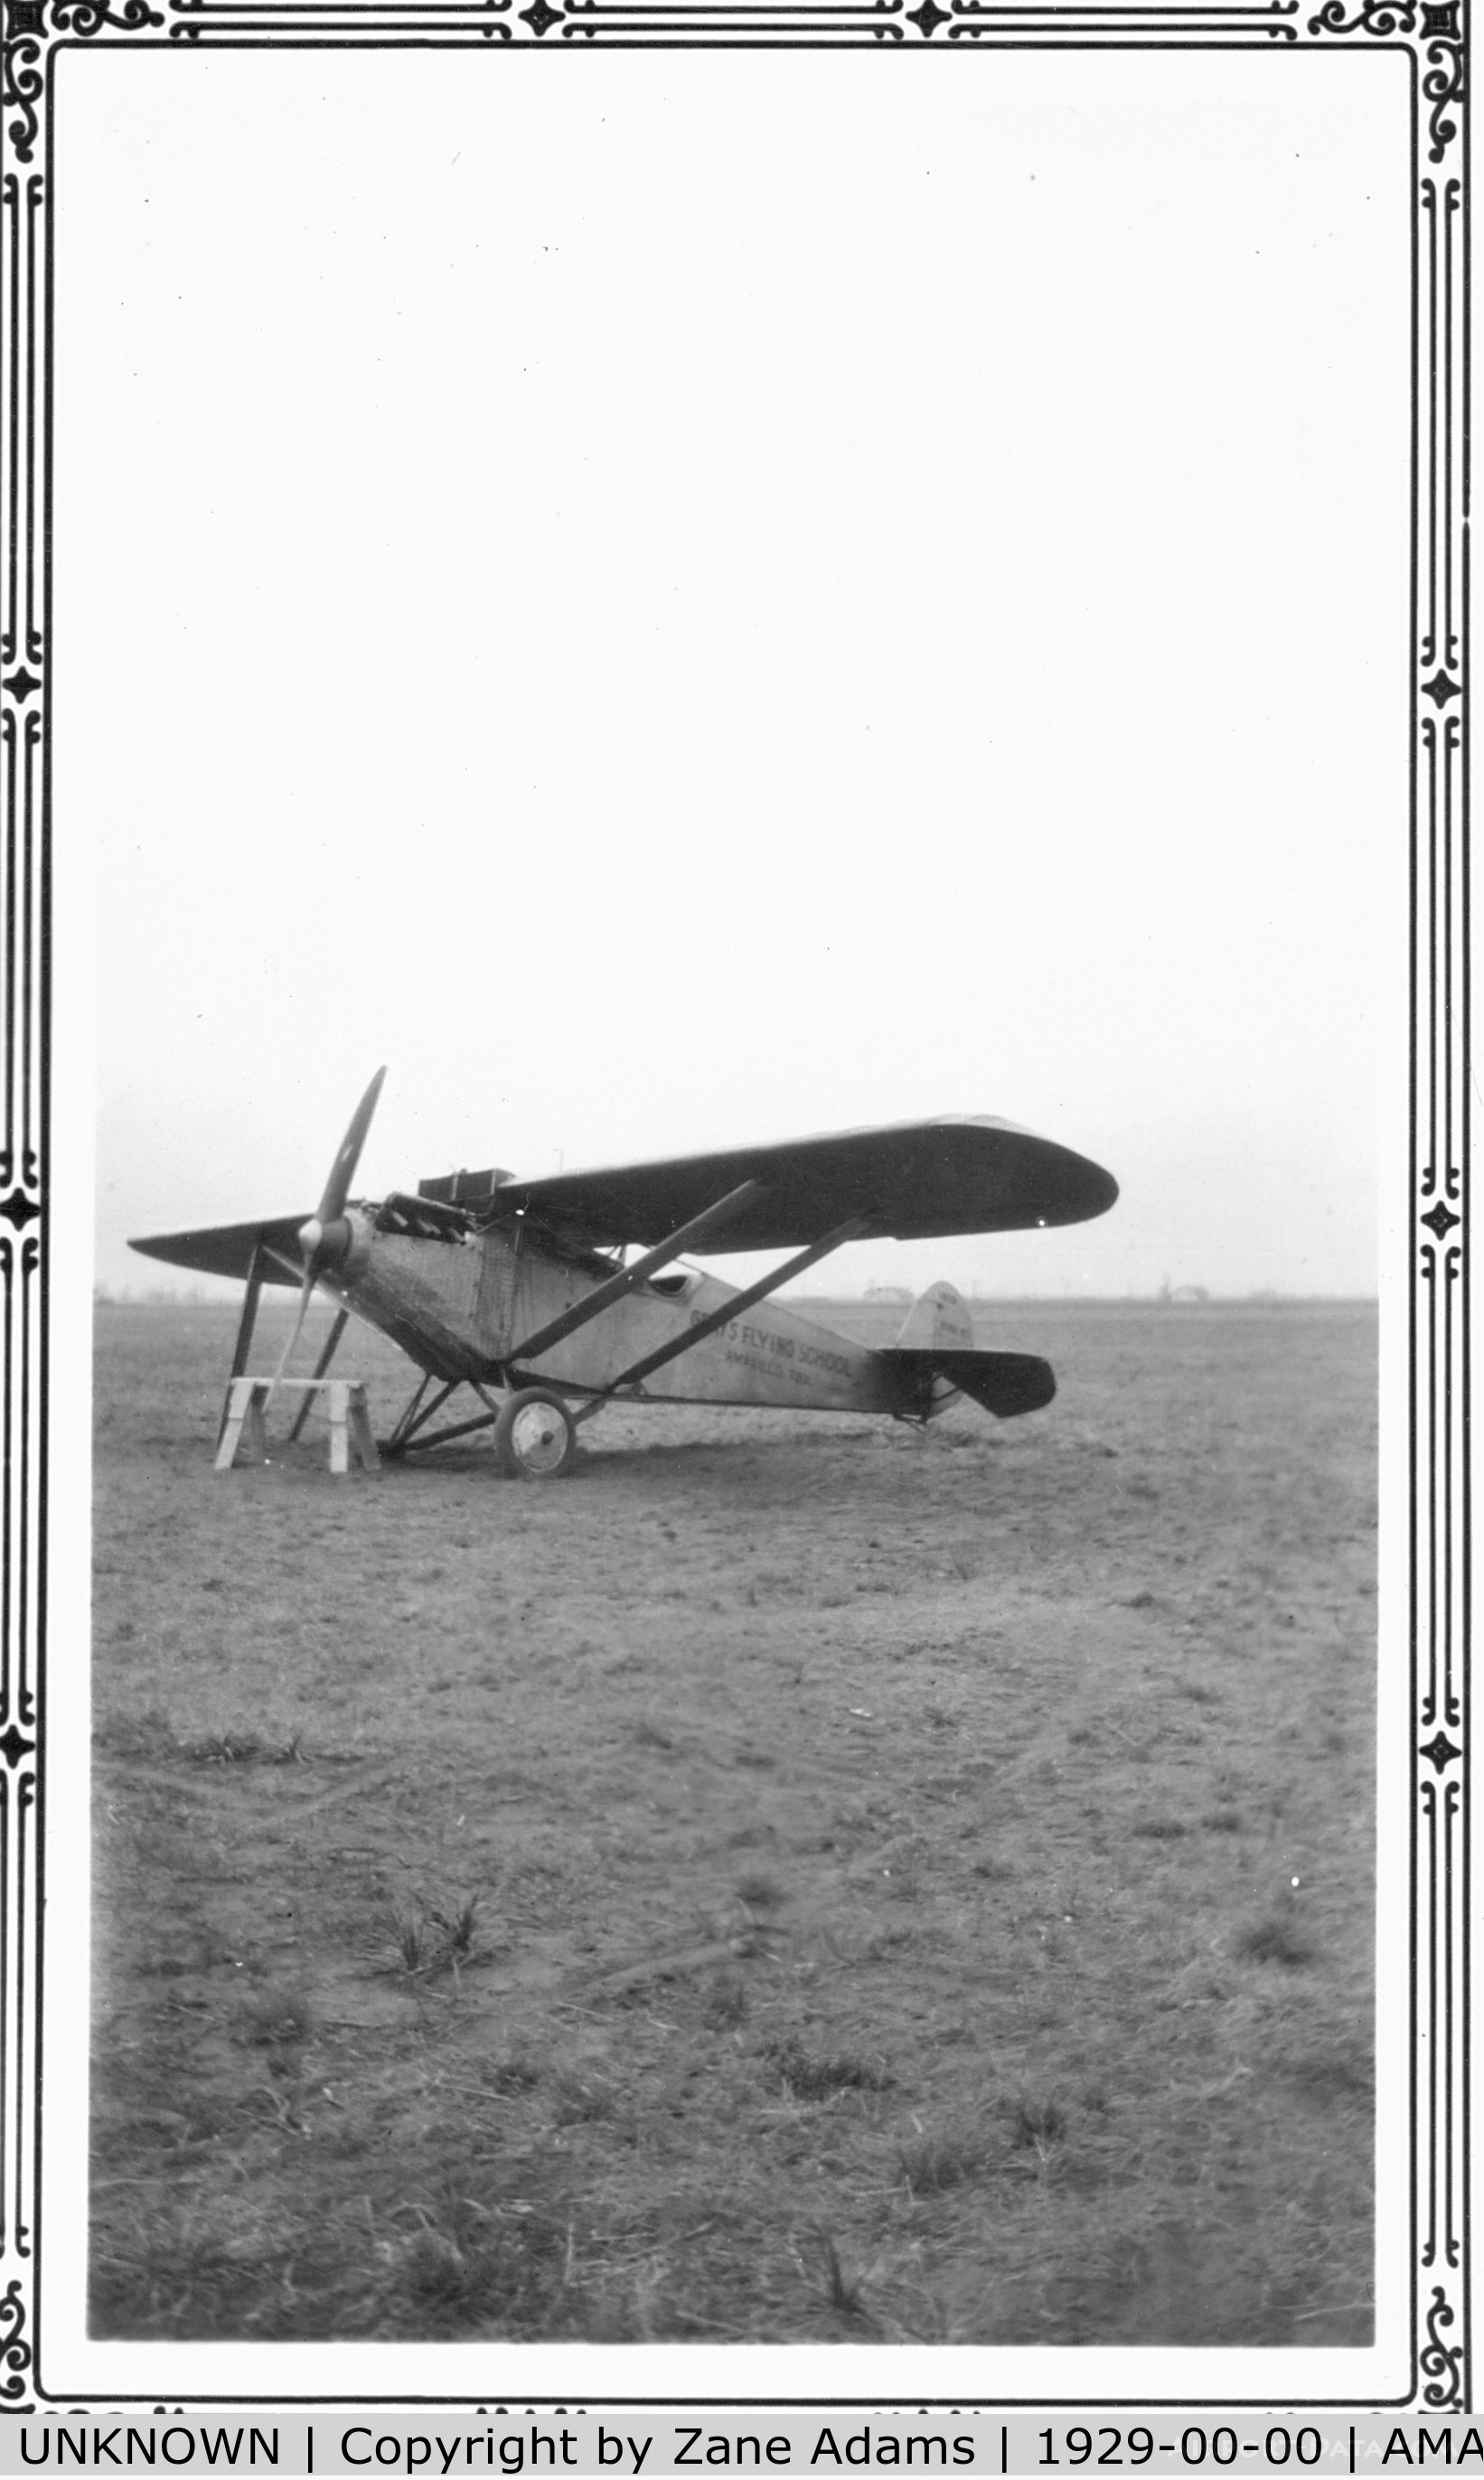 UNKNOWN, , Ryan M-1 (Hisso powered) Gray's Flying School Amarillo, TX  @ 1928-29 - Taken by my late father Charles W Adams Jr.